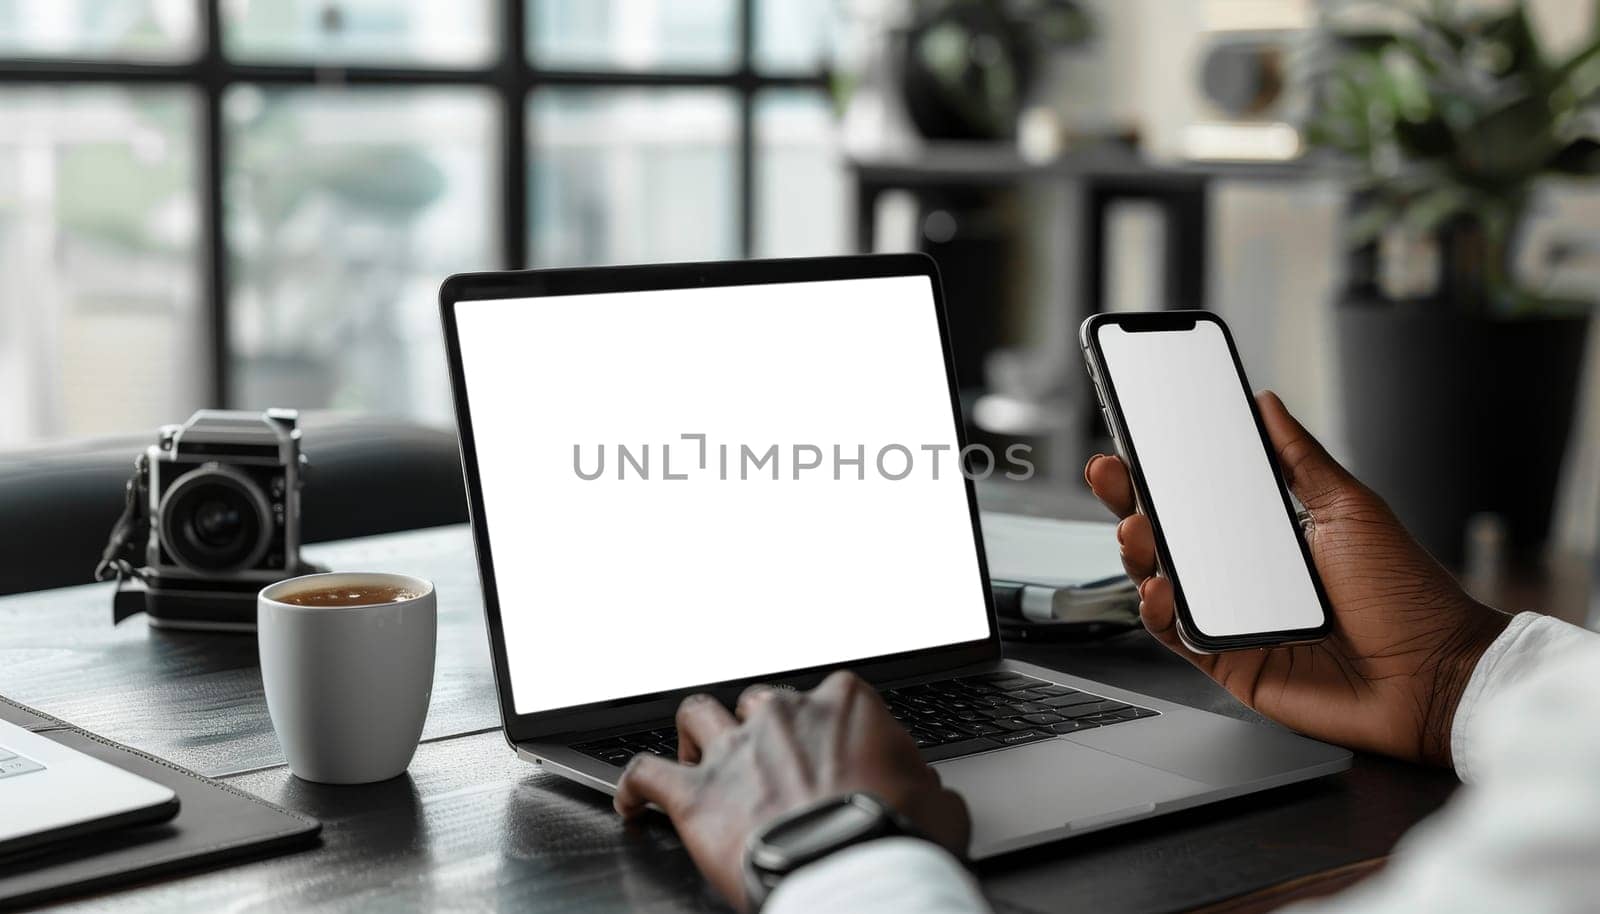 A person is holding a cell phone and a laptop computer by AI generated image.